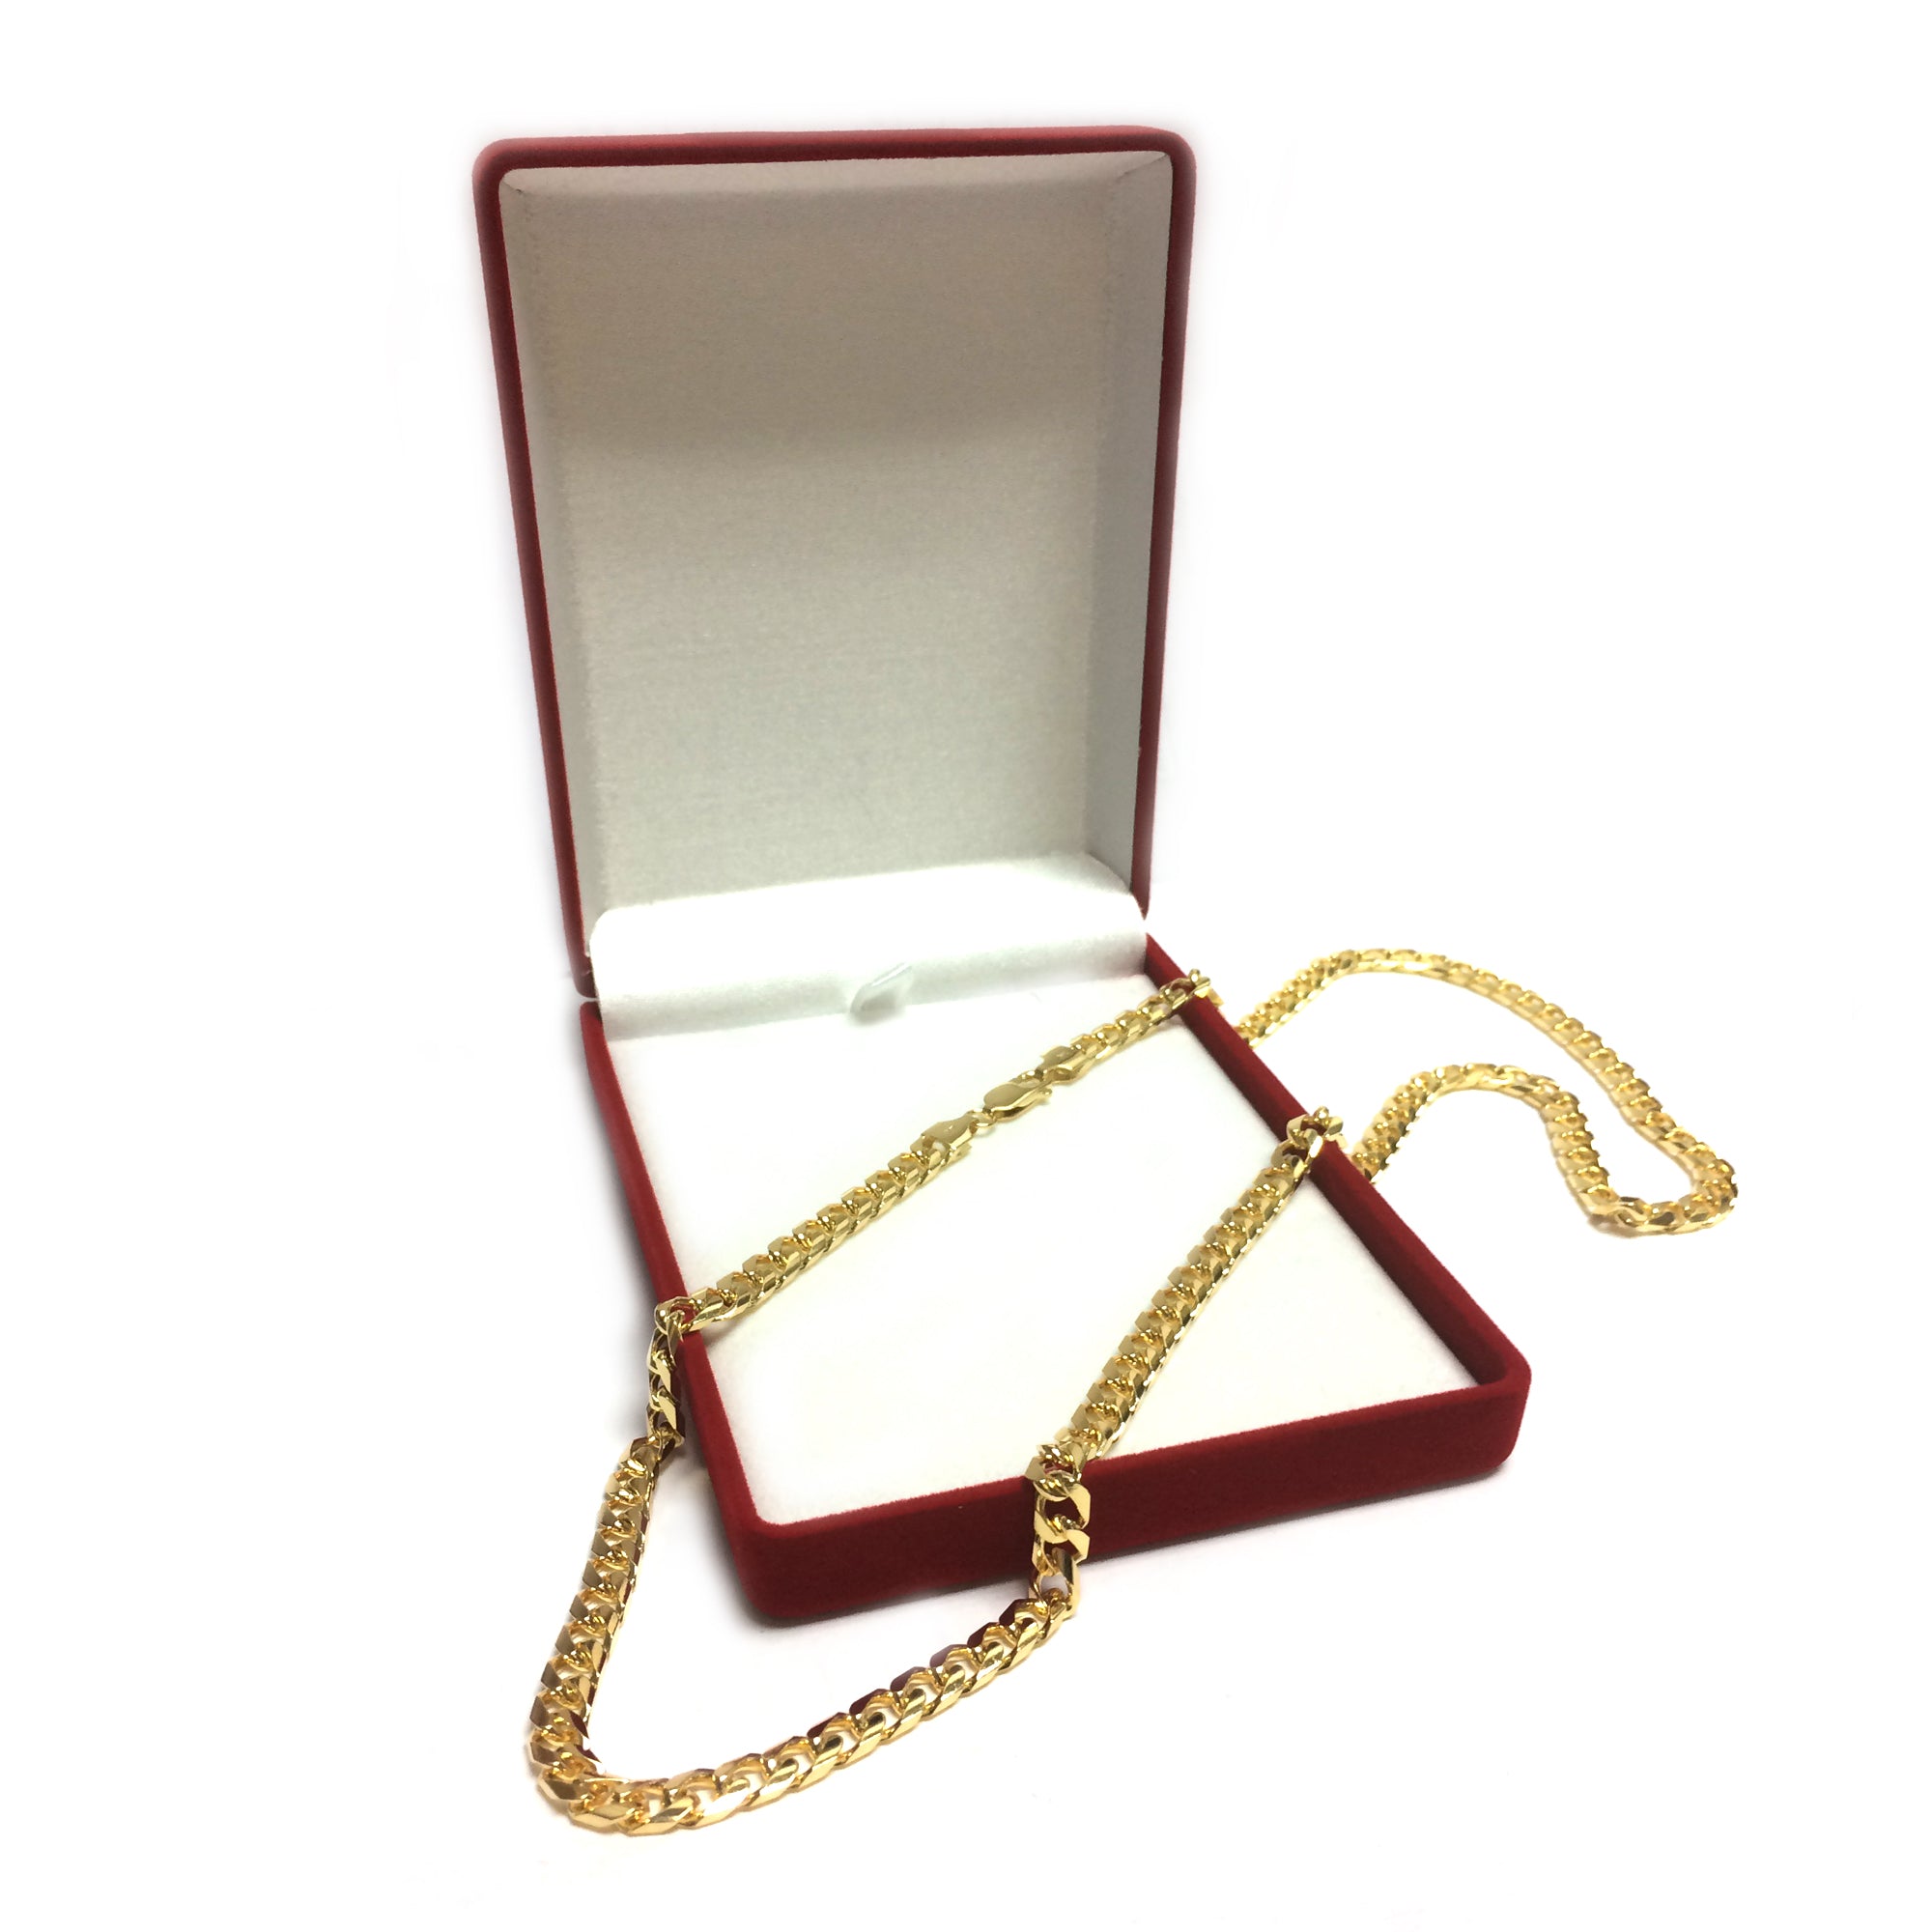 14k Yellow Gold Miami Cuban Link Chain Necklace, Width 5.8mm fine designer jewelry for men and women